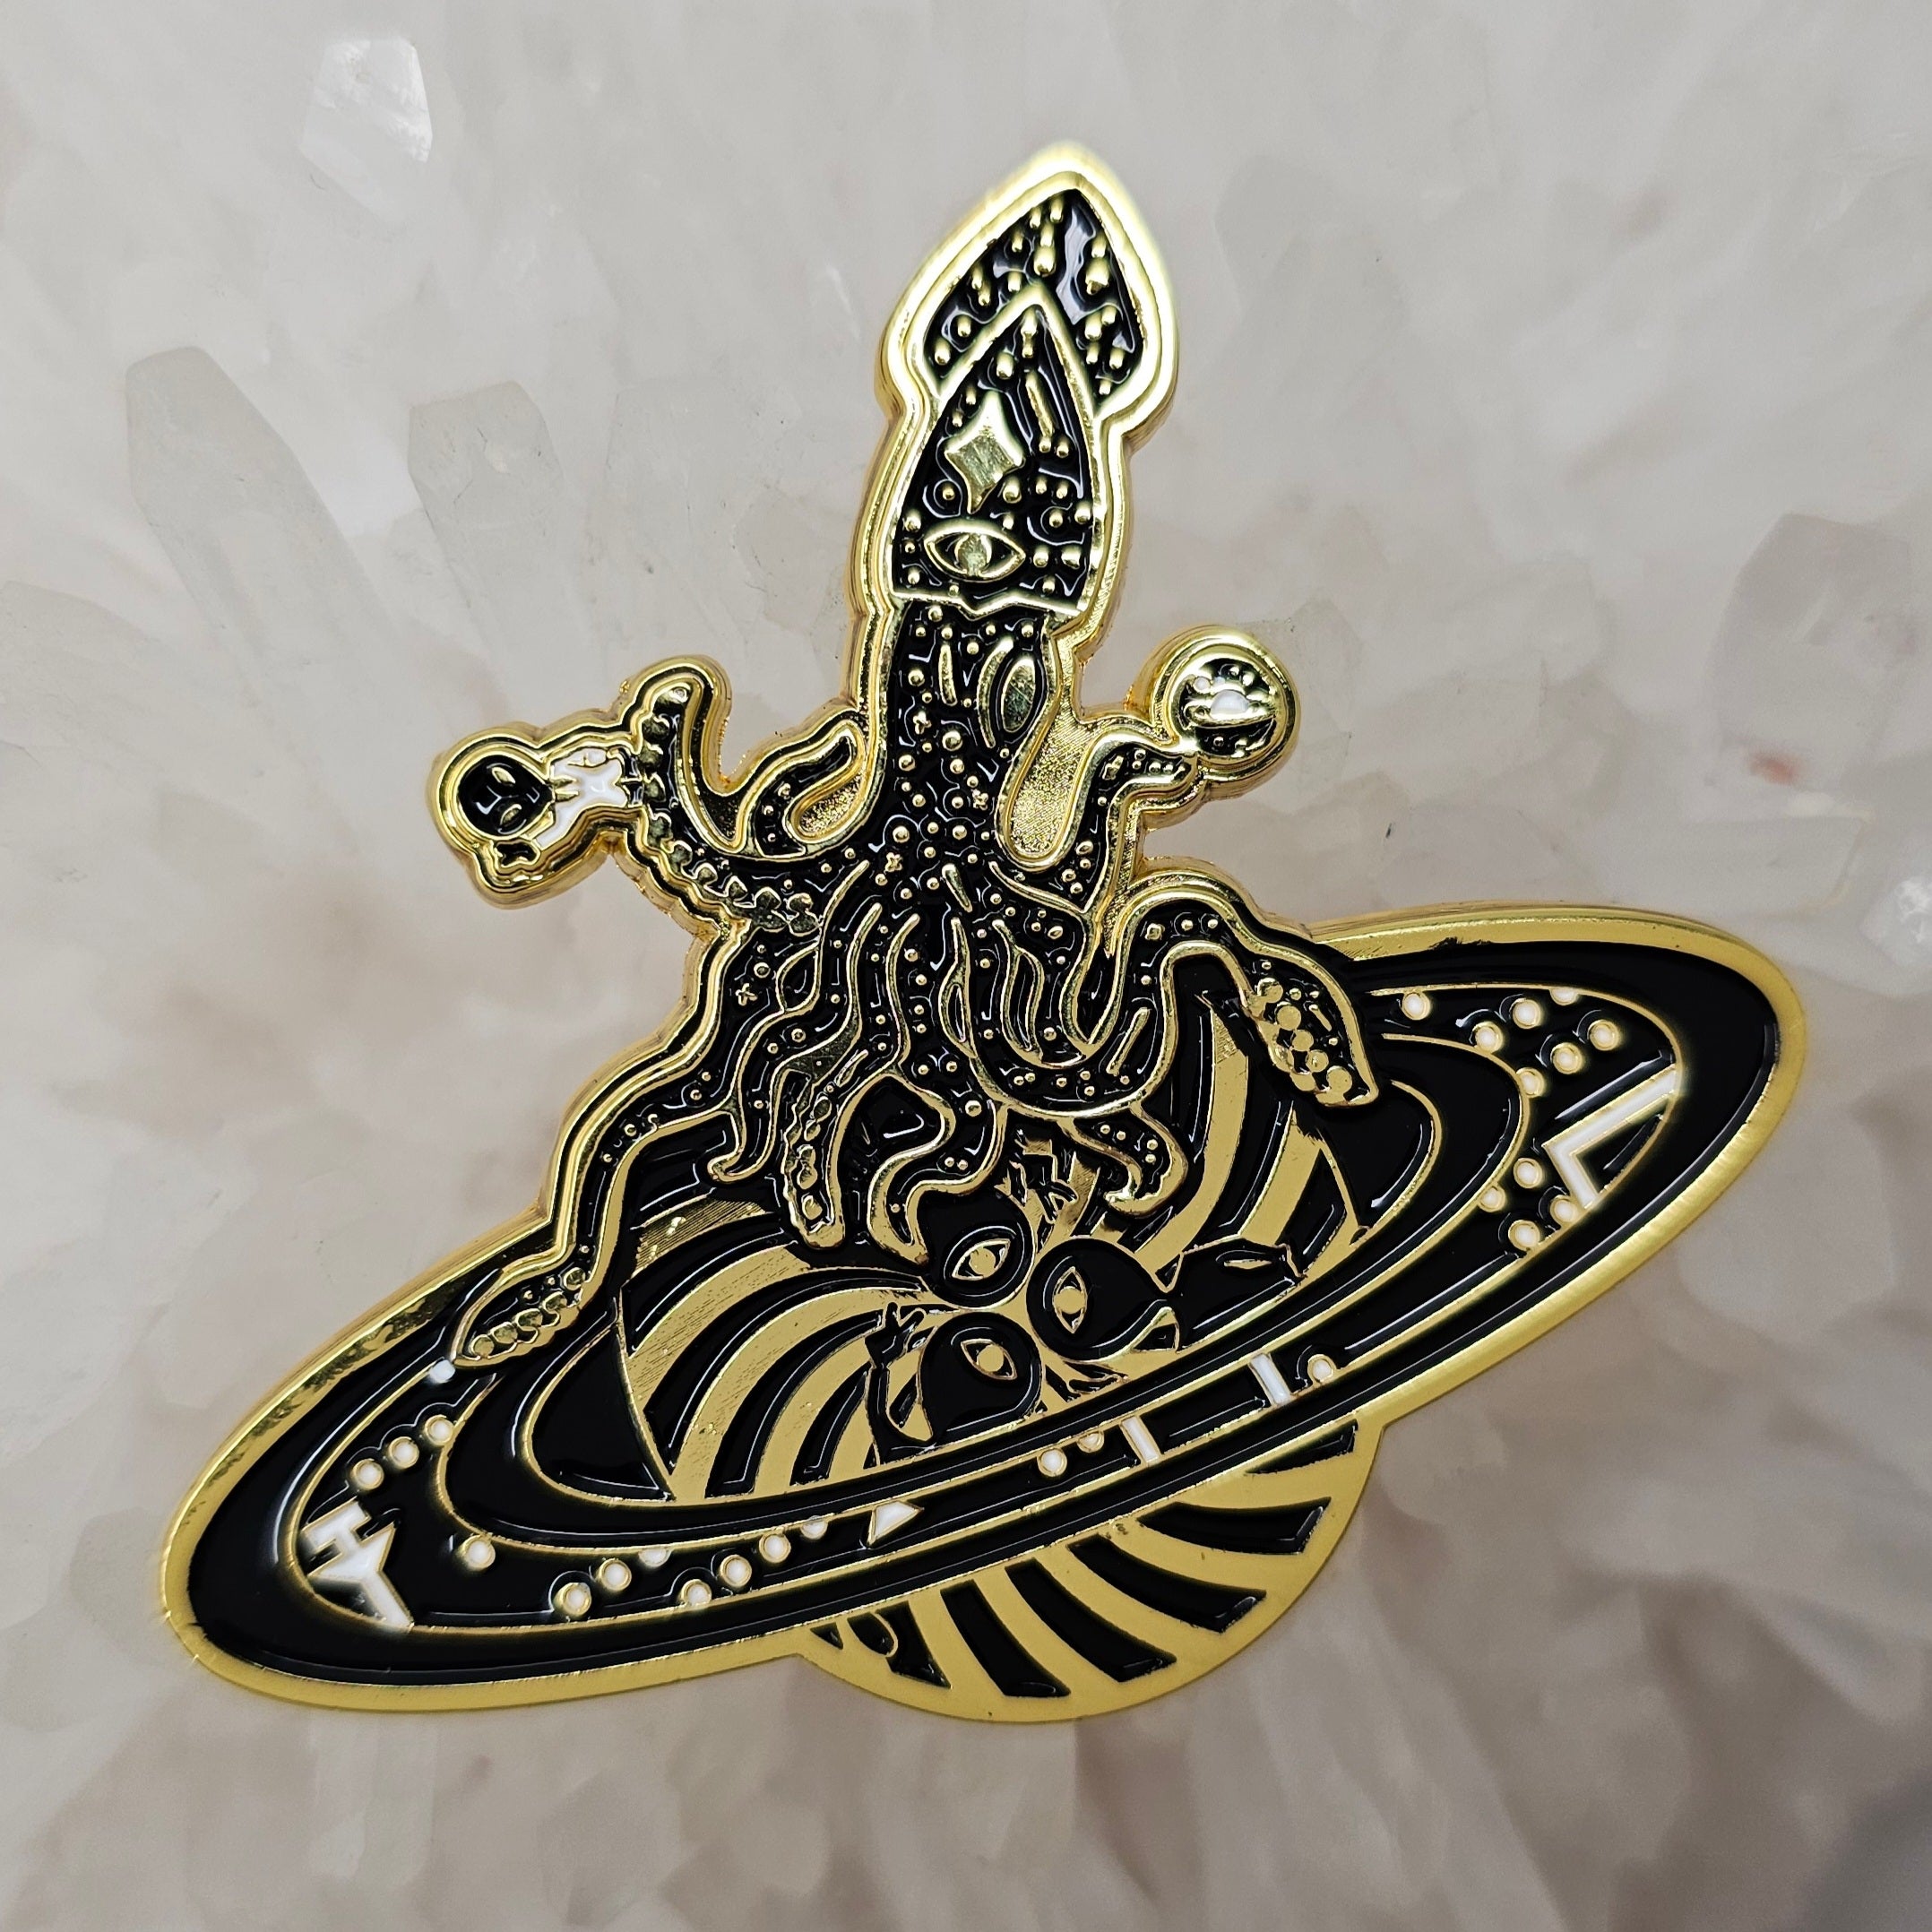 Saturn Squid Planet Martian Psychedelic Space Art Gold Metal Enamel Pins Hat Pins Lapel Pin Brooch Badge Festival Pin